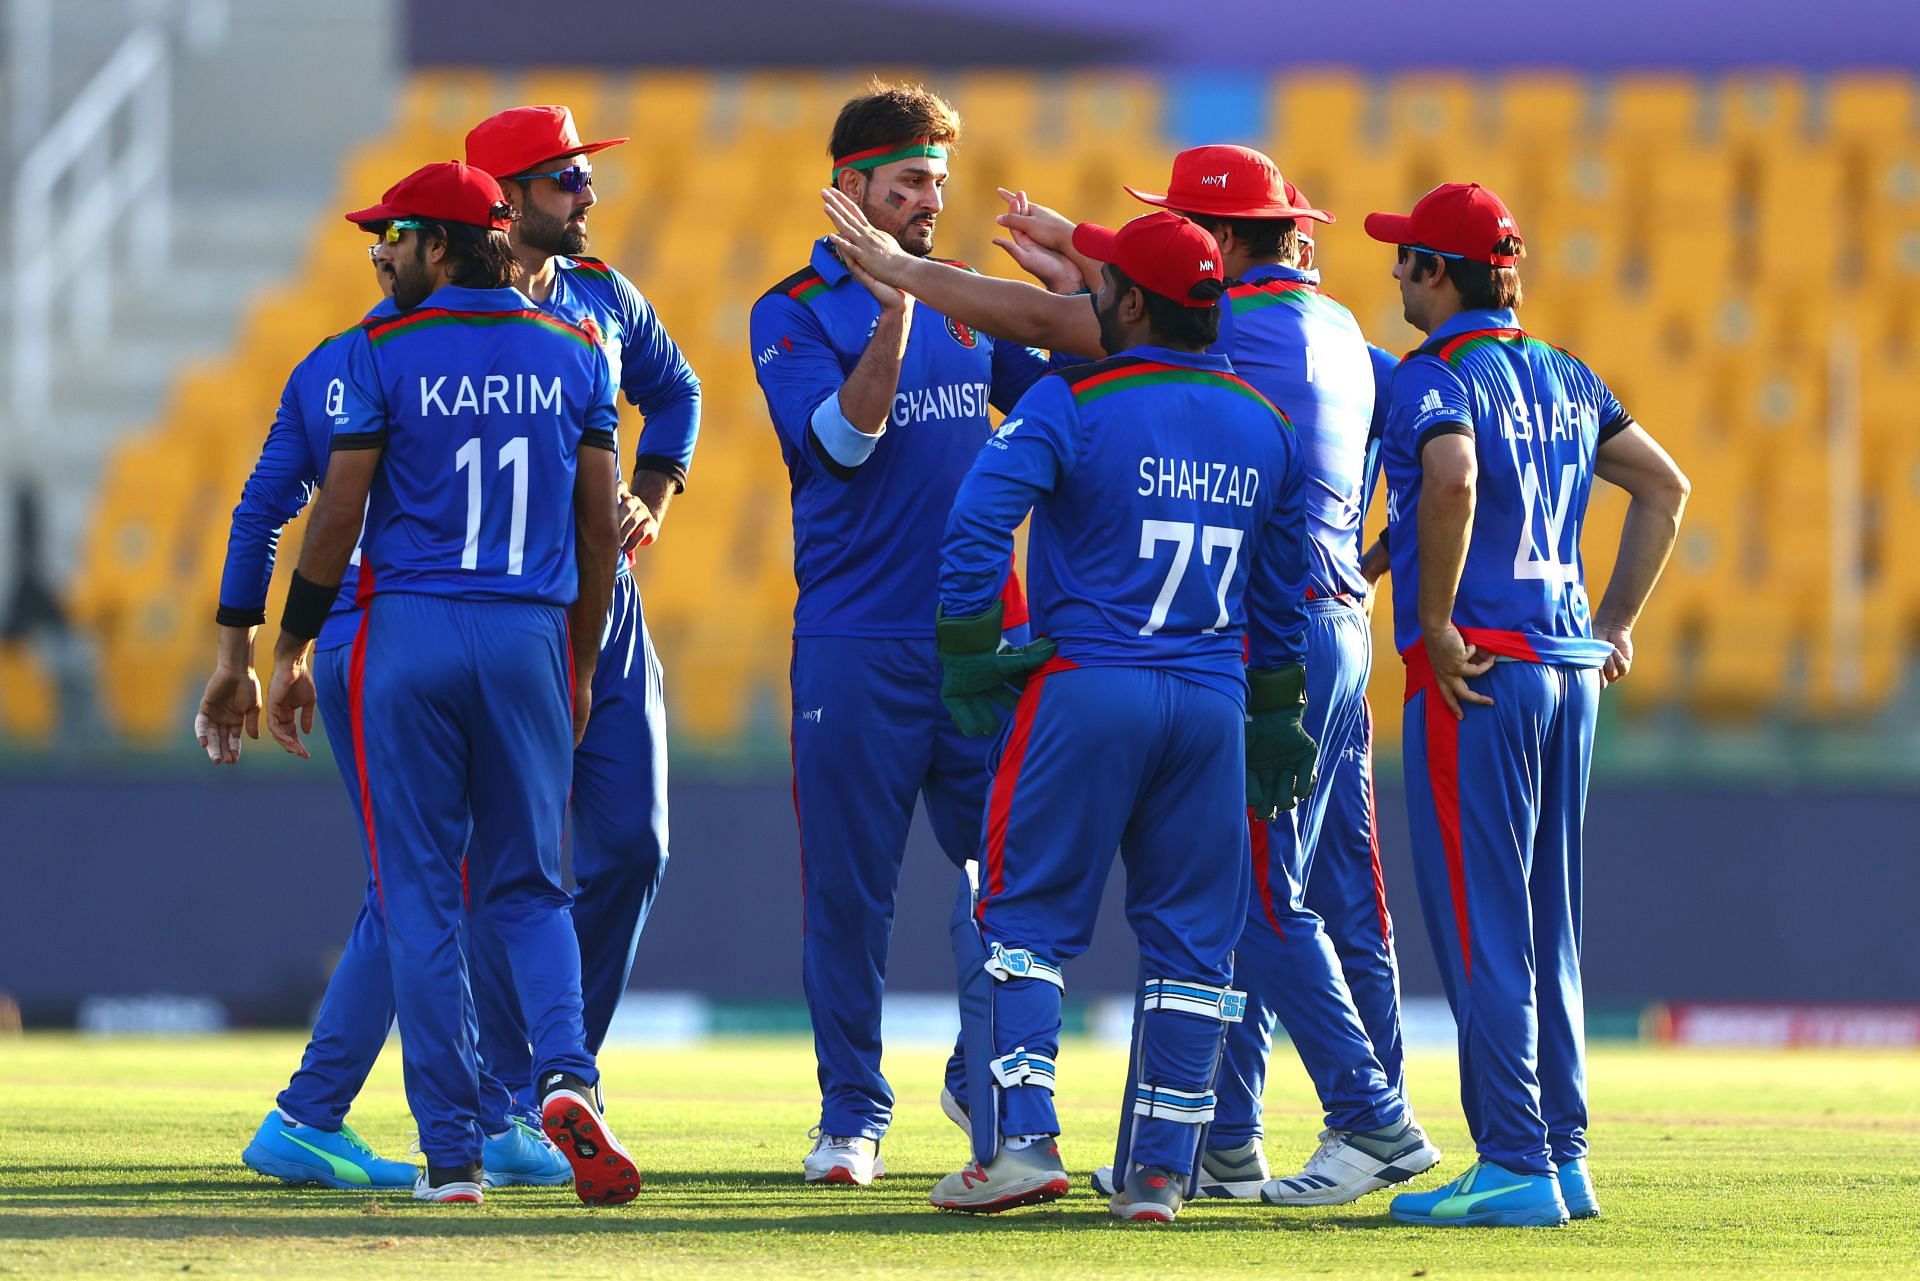 Afghanistan cricket team. Pic: Getty Images